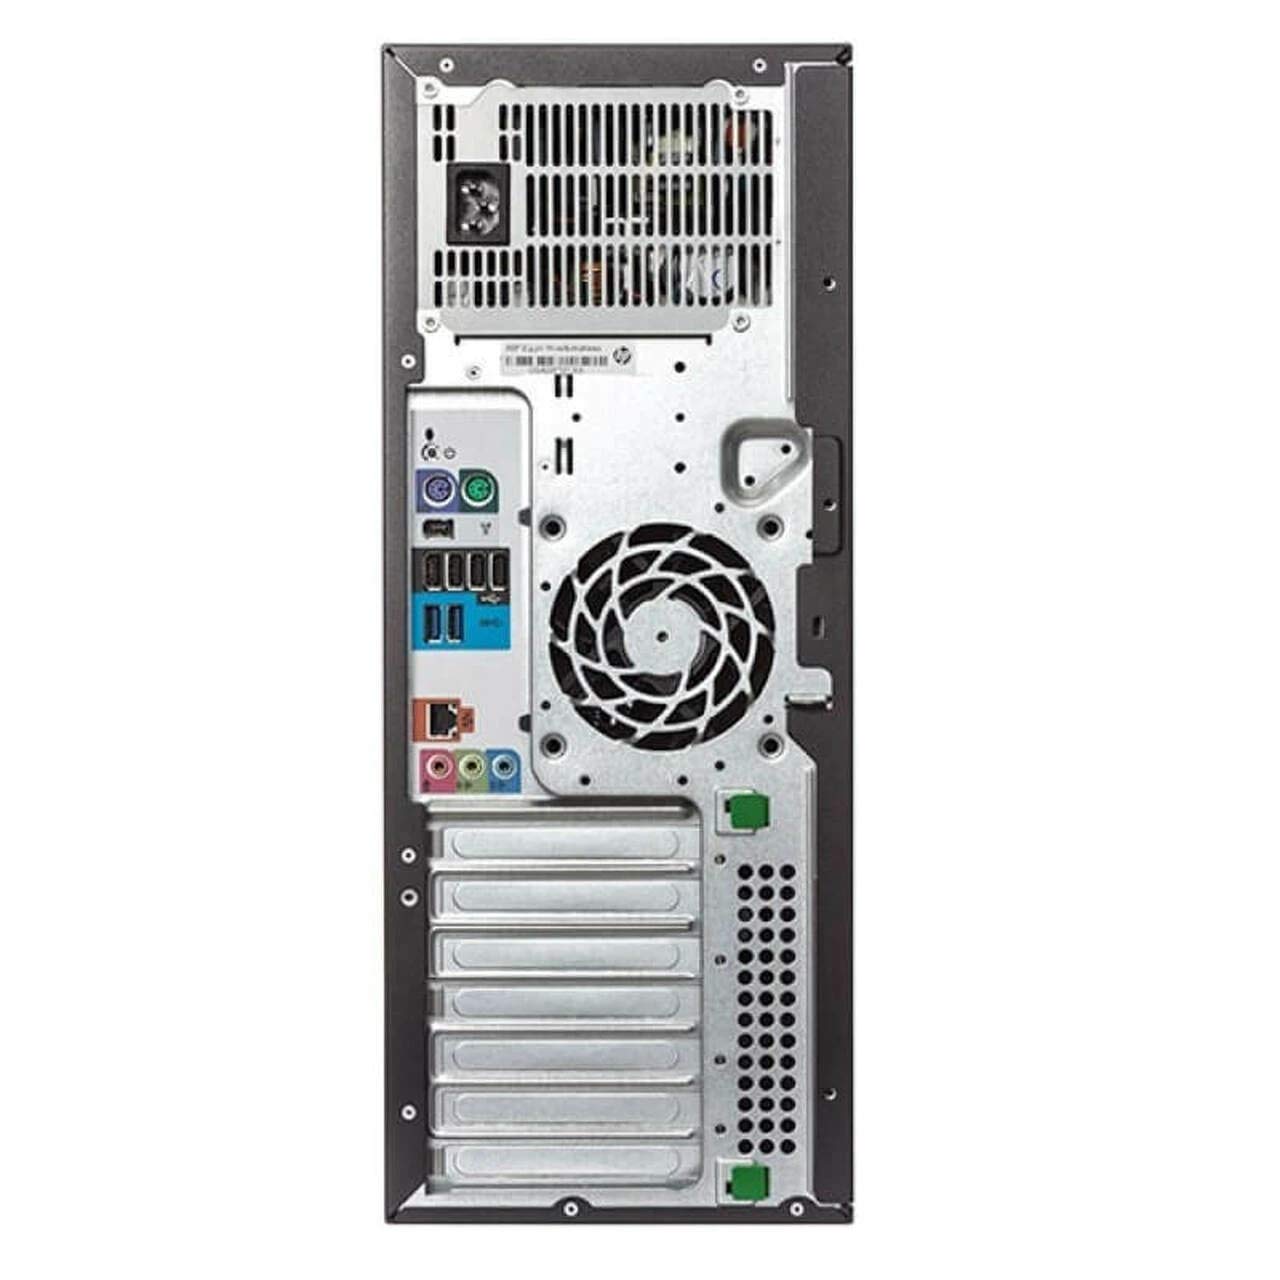 HP Z420 Workstation Computer - 8 Core Intel E5 2670 up to 3.3GHz CPU 20 MB Cache - 64GB DDR3 ECC RAM - NEW 1TB SSD + NEW 4TB HD - Nvidia Quadro 4000 2GB - 3D Rendering and Designing (Renewed)